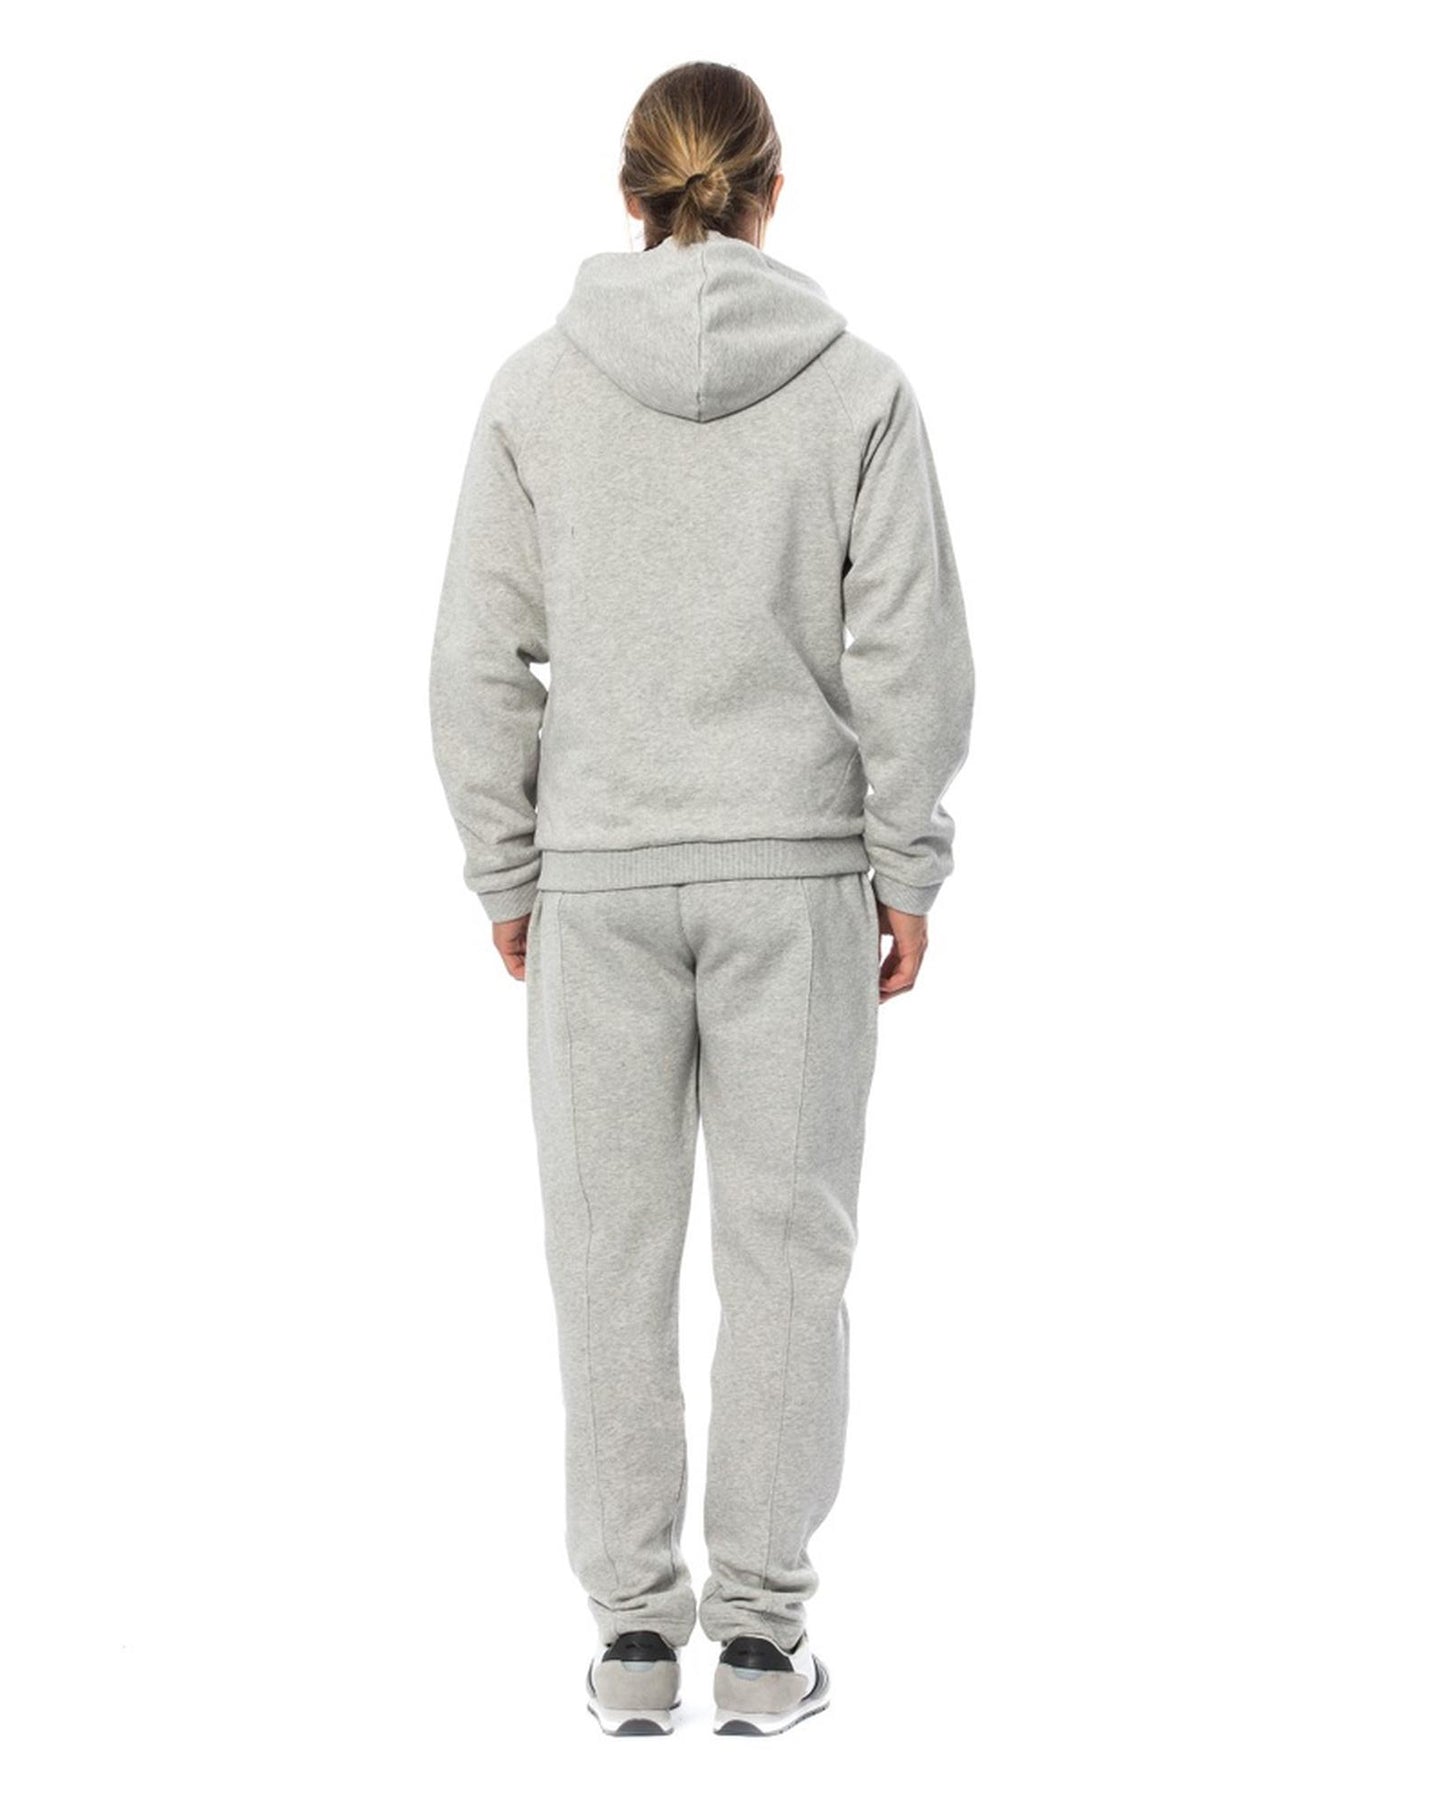 Billionaire Italian Couture Sweatsuit with Hooded Sweater and Elasticated Pants 4XL Men